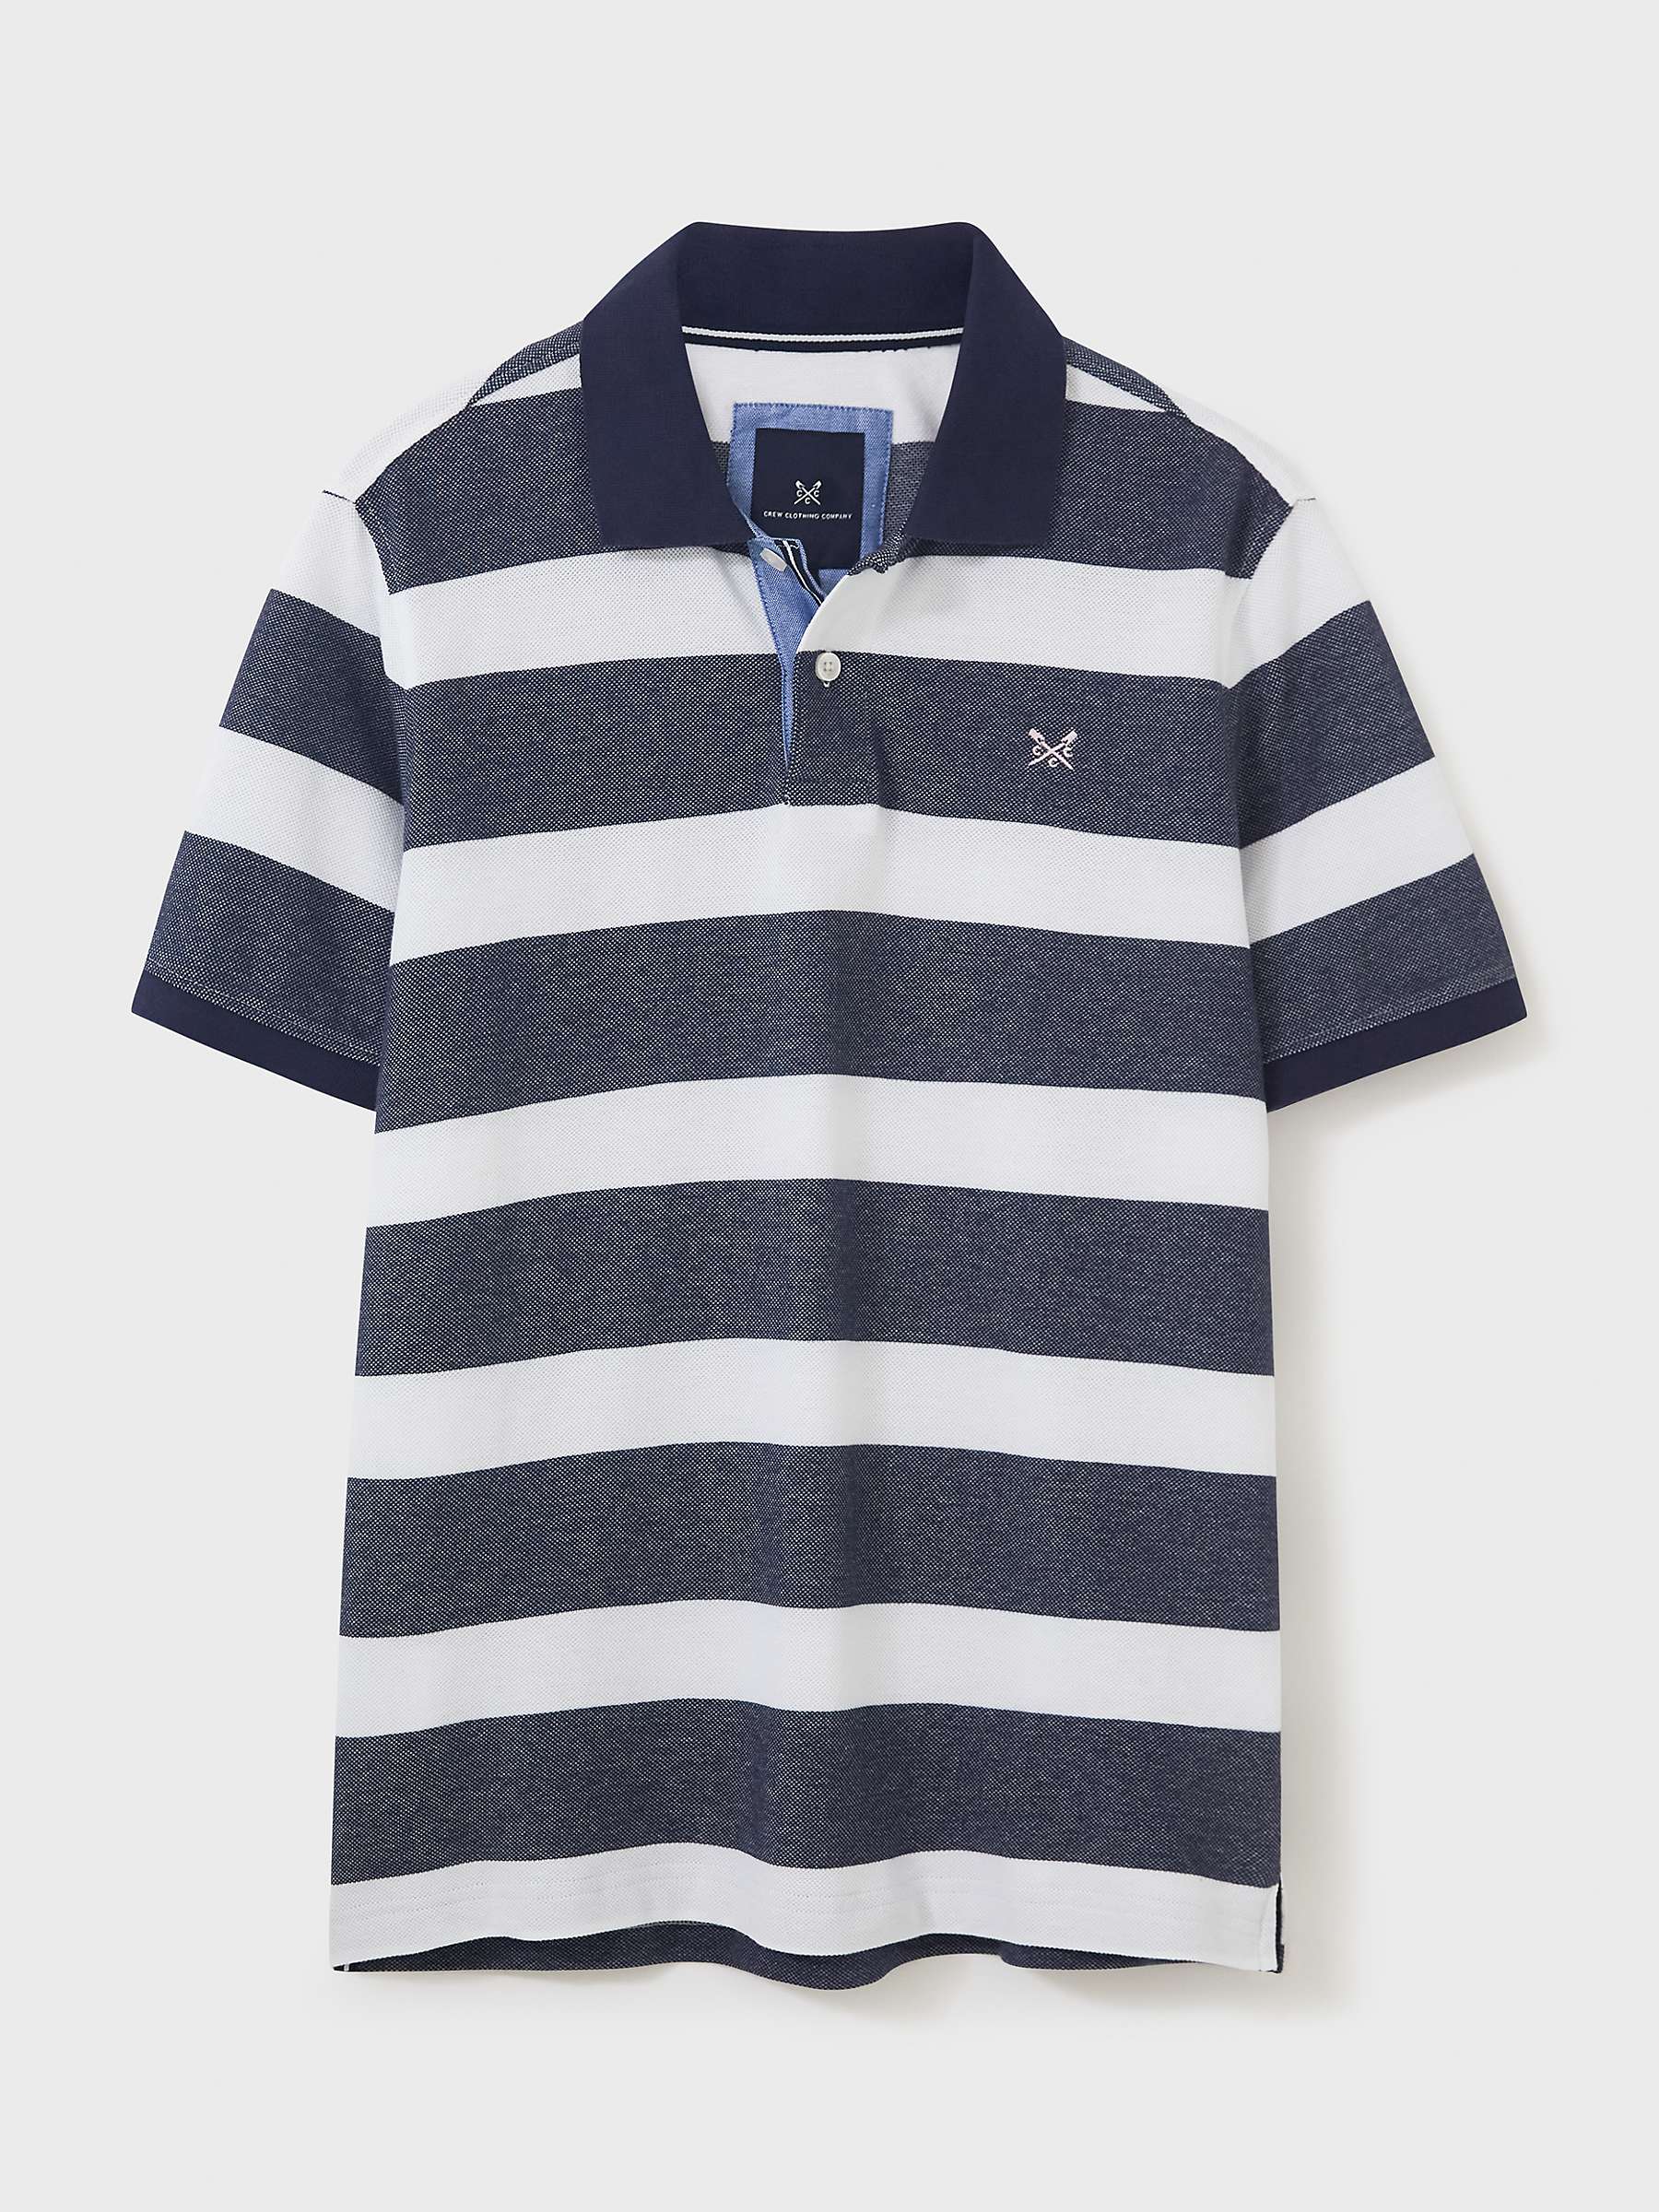 Buy Crew Clothing Stripe Polo Shirt Online at johnlewis.com